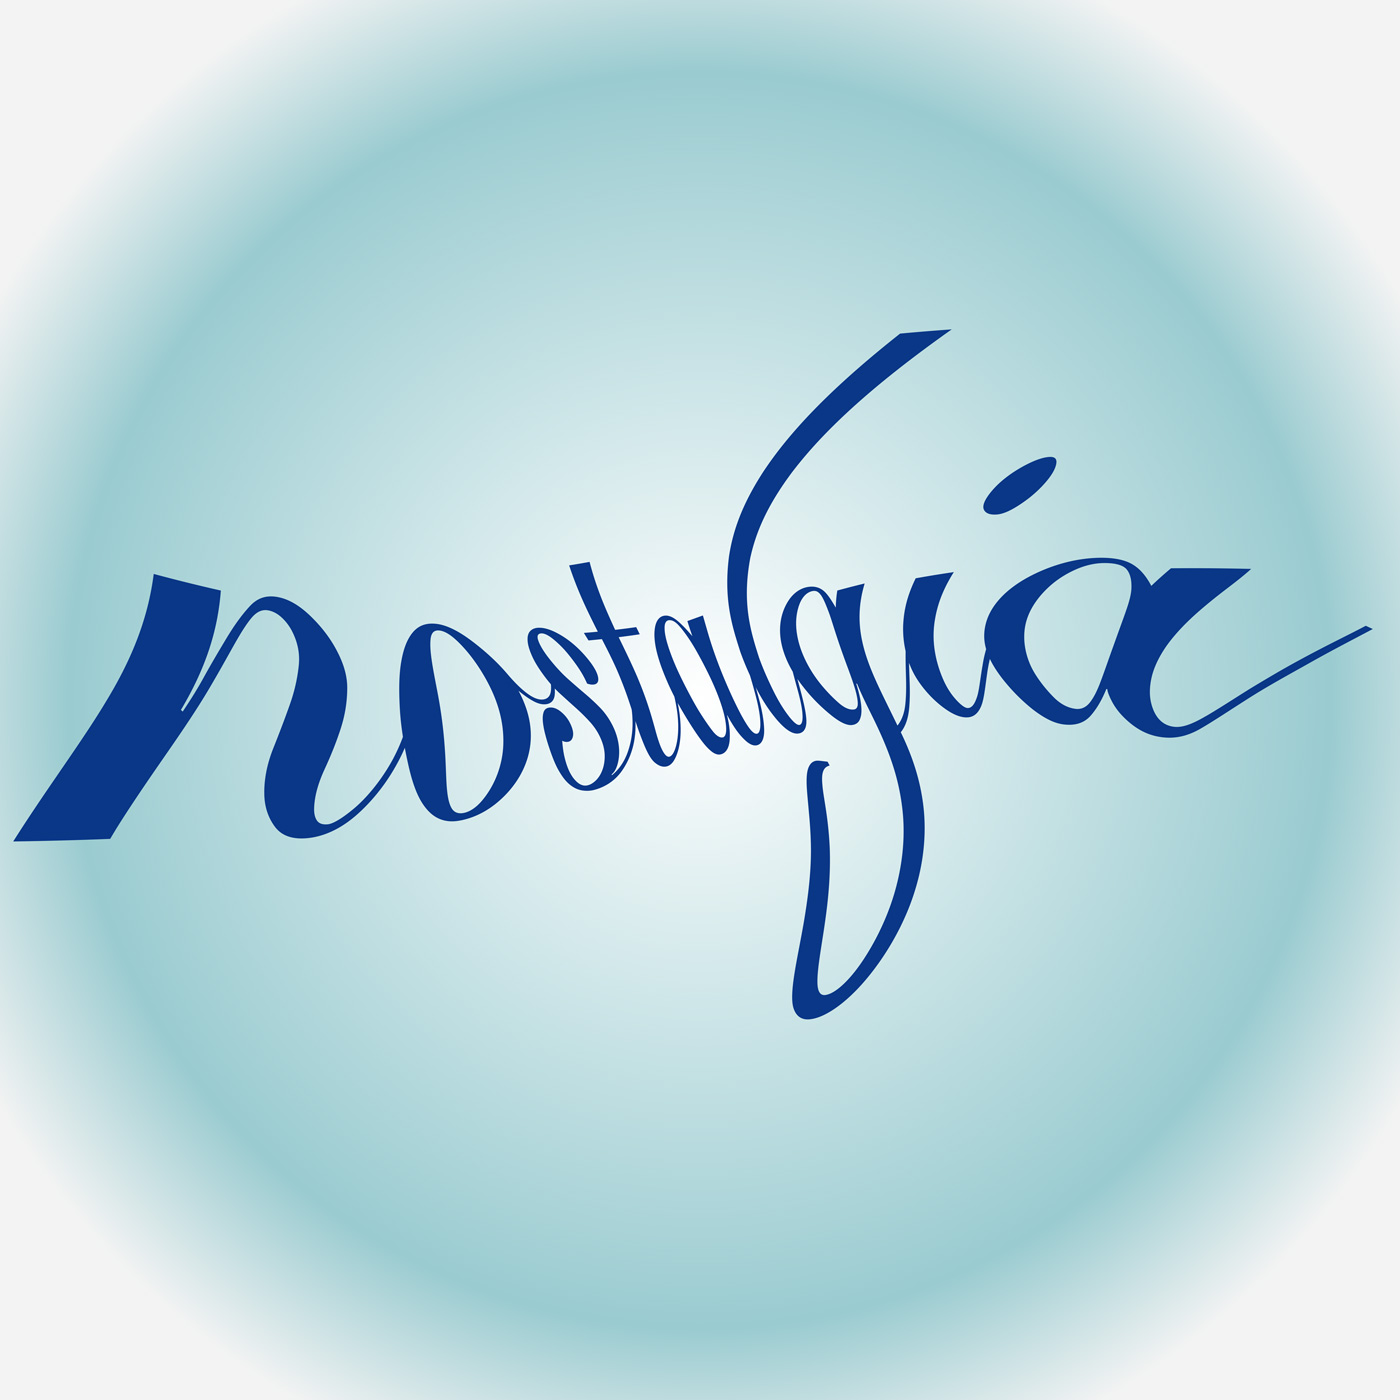 the word nostalgia in twisted blue script against a soft-focus light blue circle